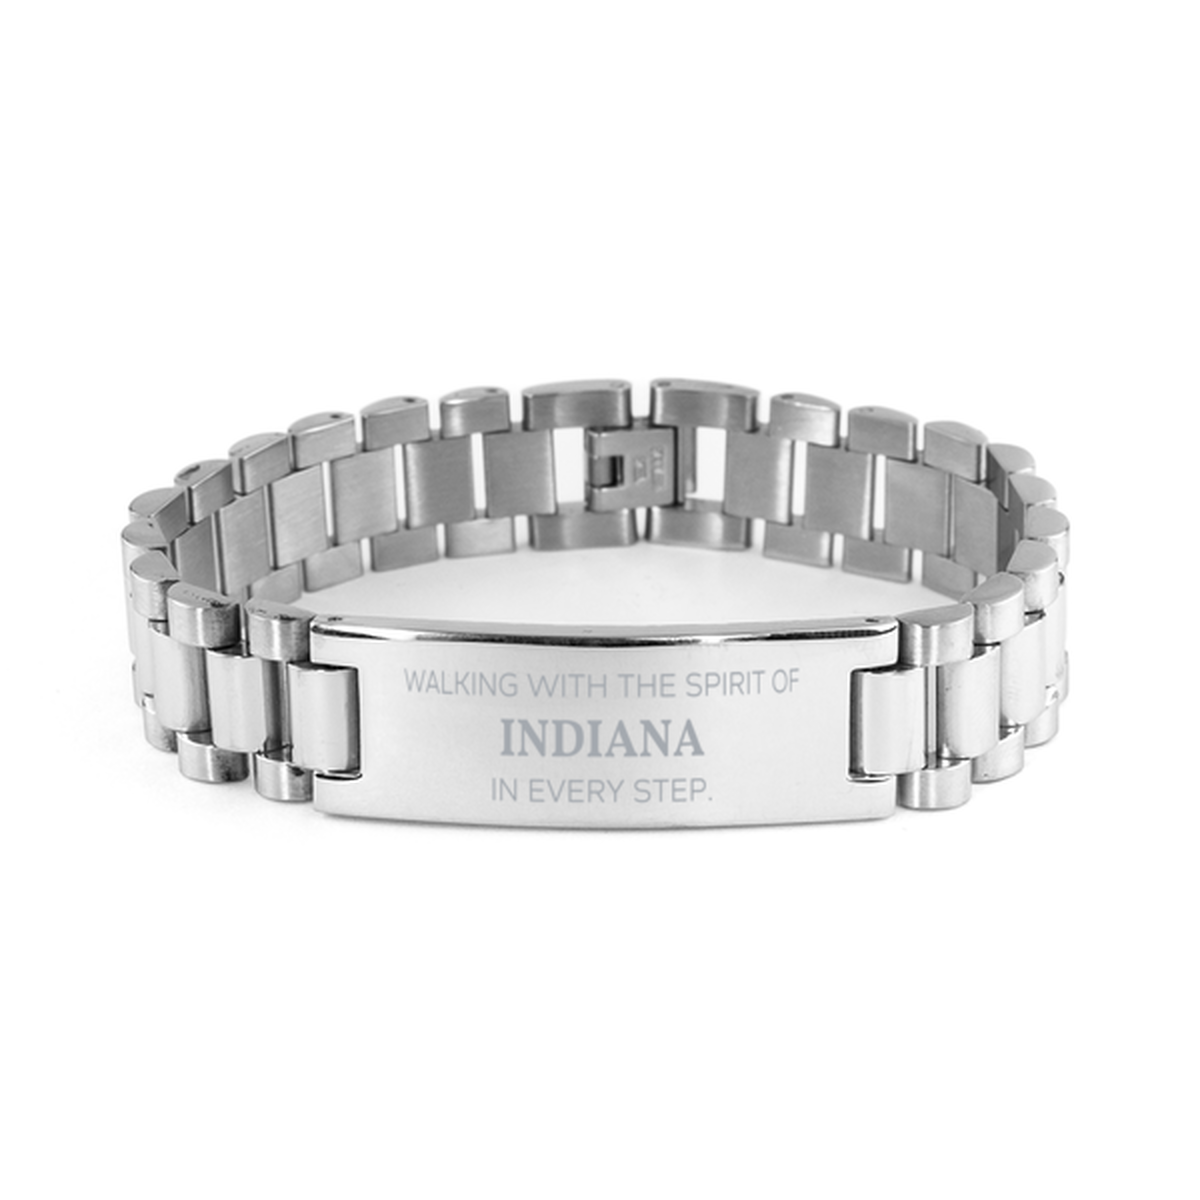 Indiana Gifts, Walking with the spirit, Love Indiana Birthday Christmas Ladder Stainless Steel Bracelet For Indiana People, Men, Women, Friends